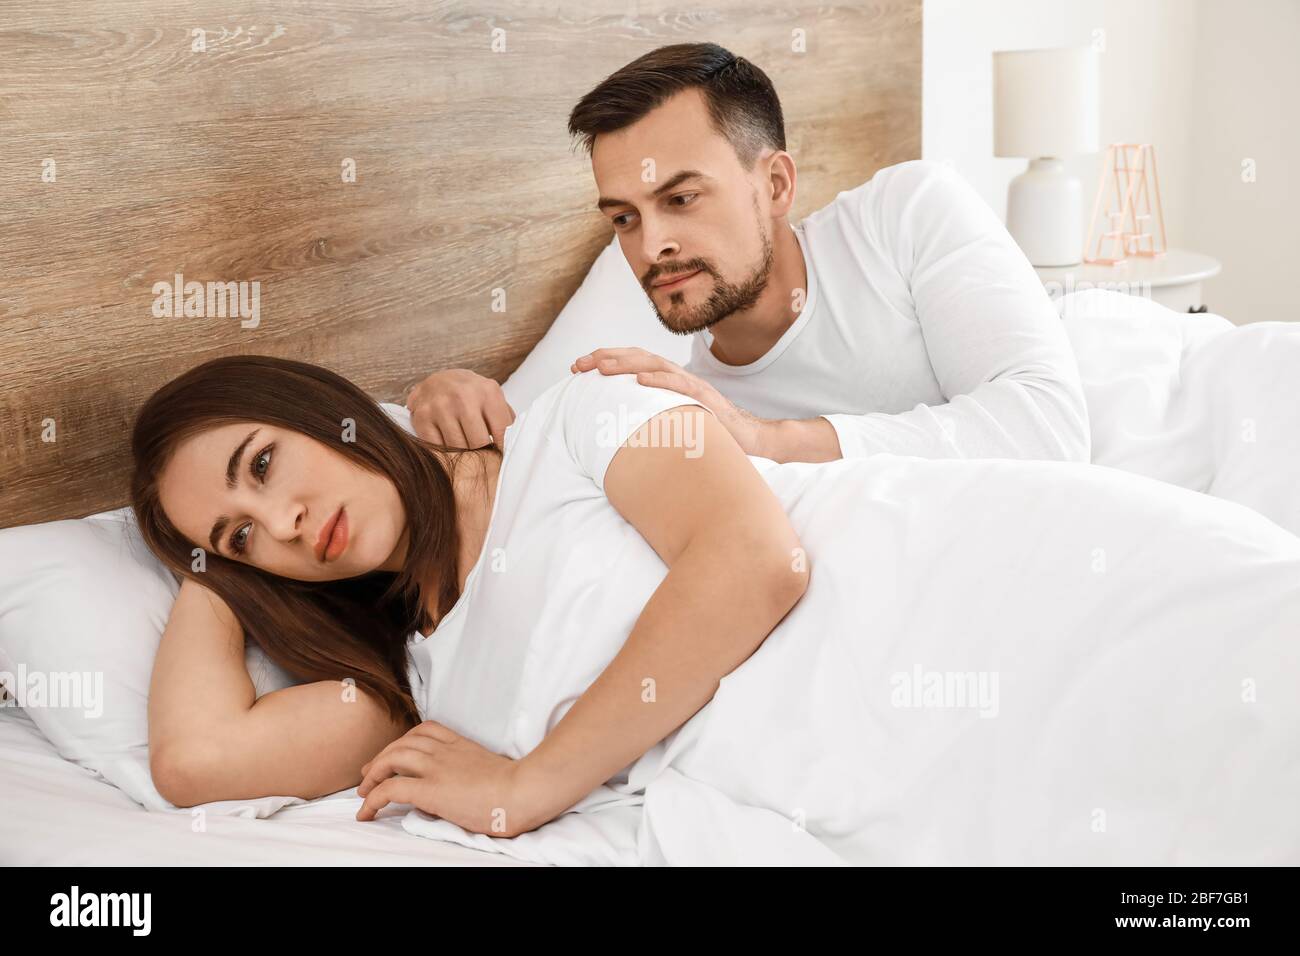 Young man trying to make peace with wife after quarrel in bedroom Stock Photo photo